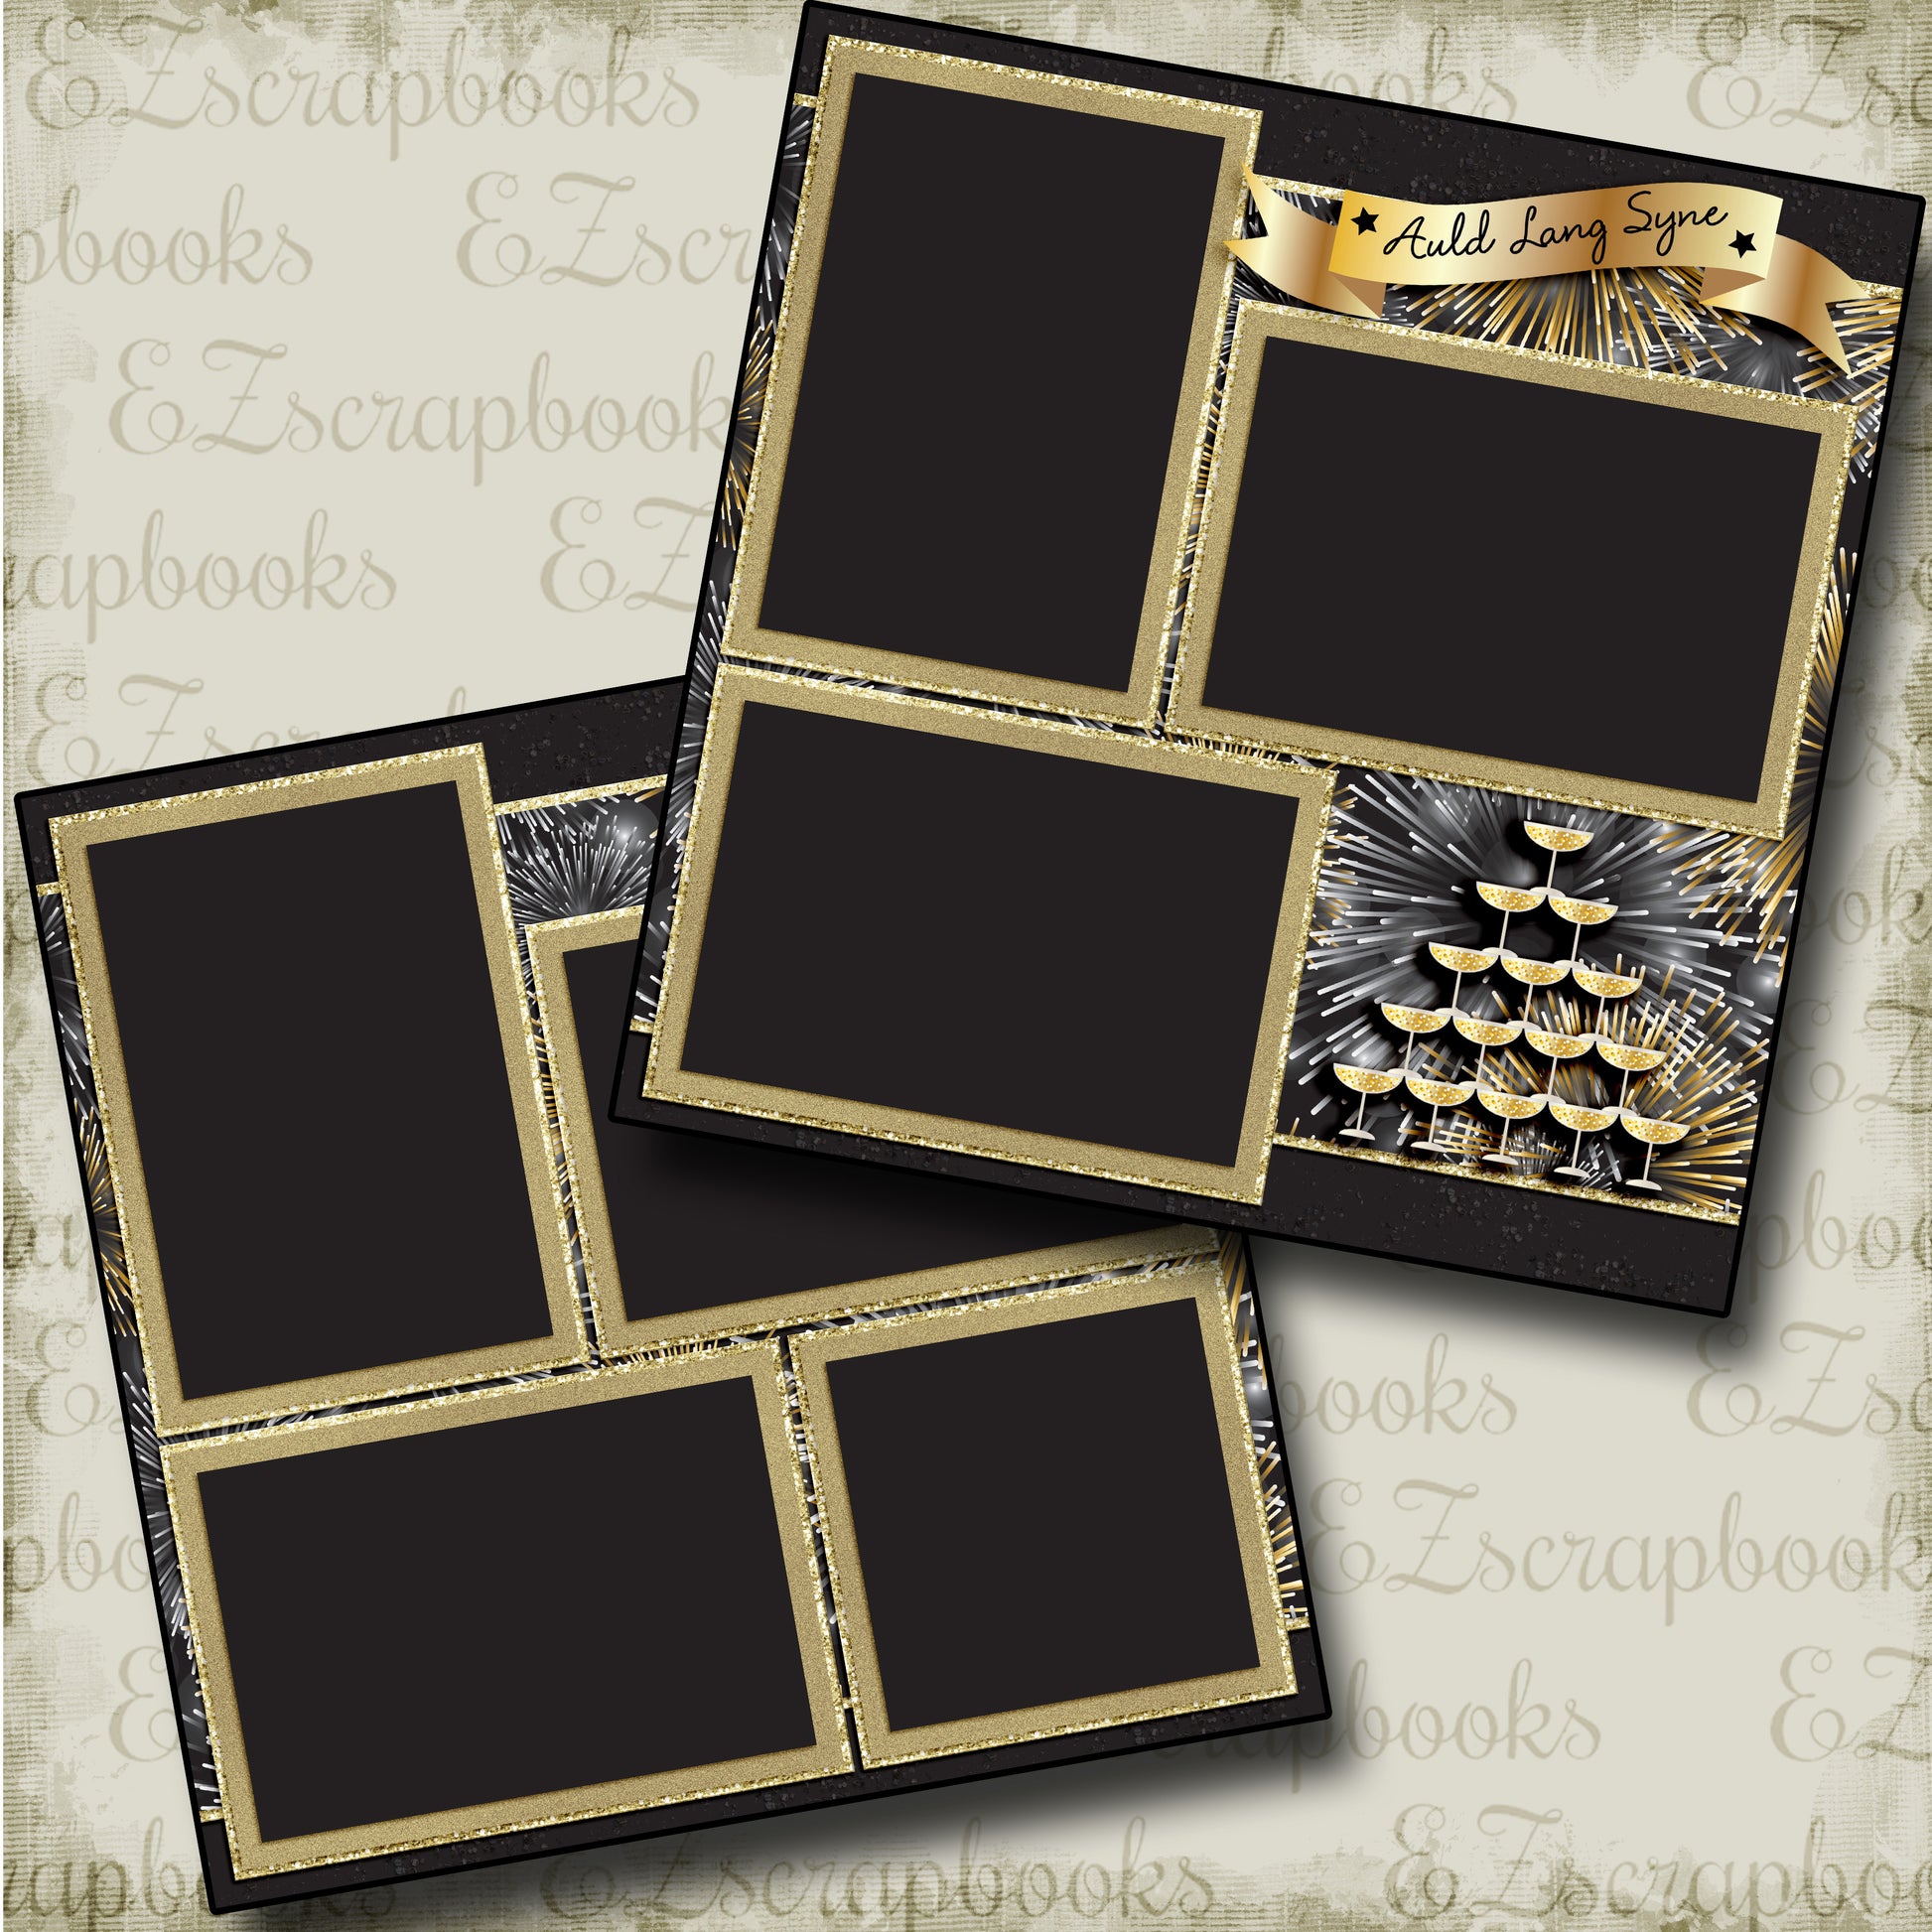 Auld Lang Syne - 3684 - EZscrapbooks Scrapbook Layouts New Year's